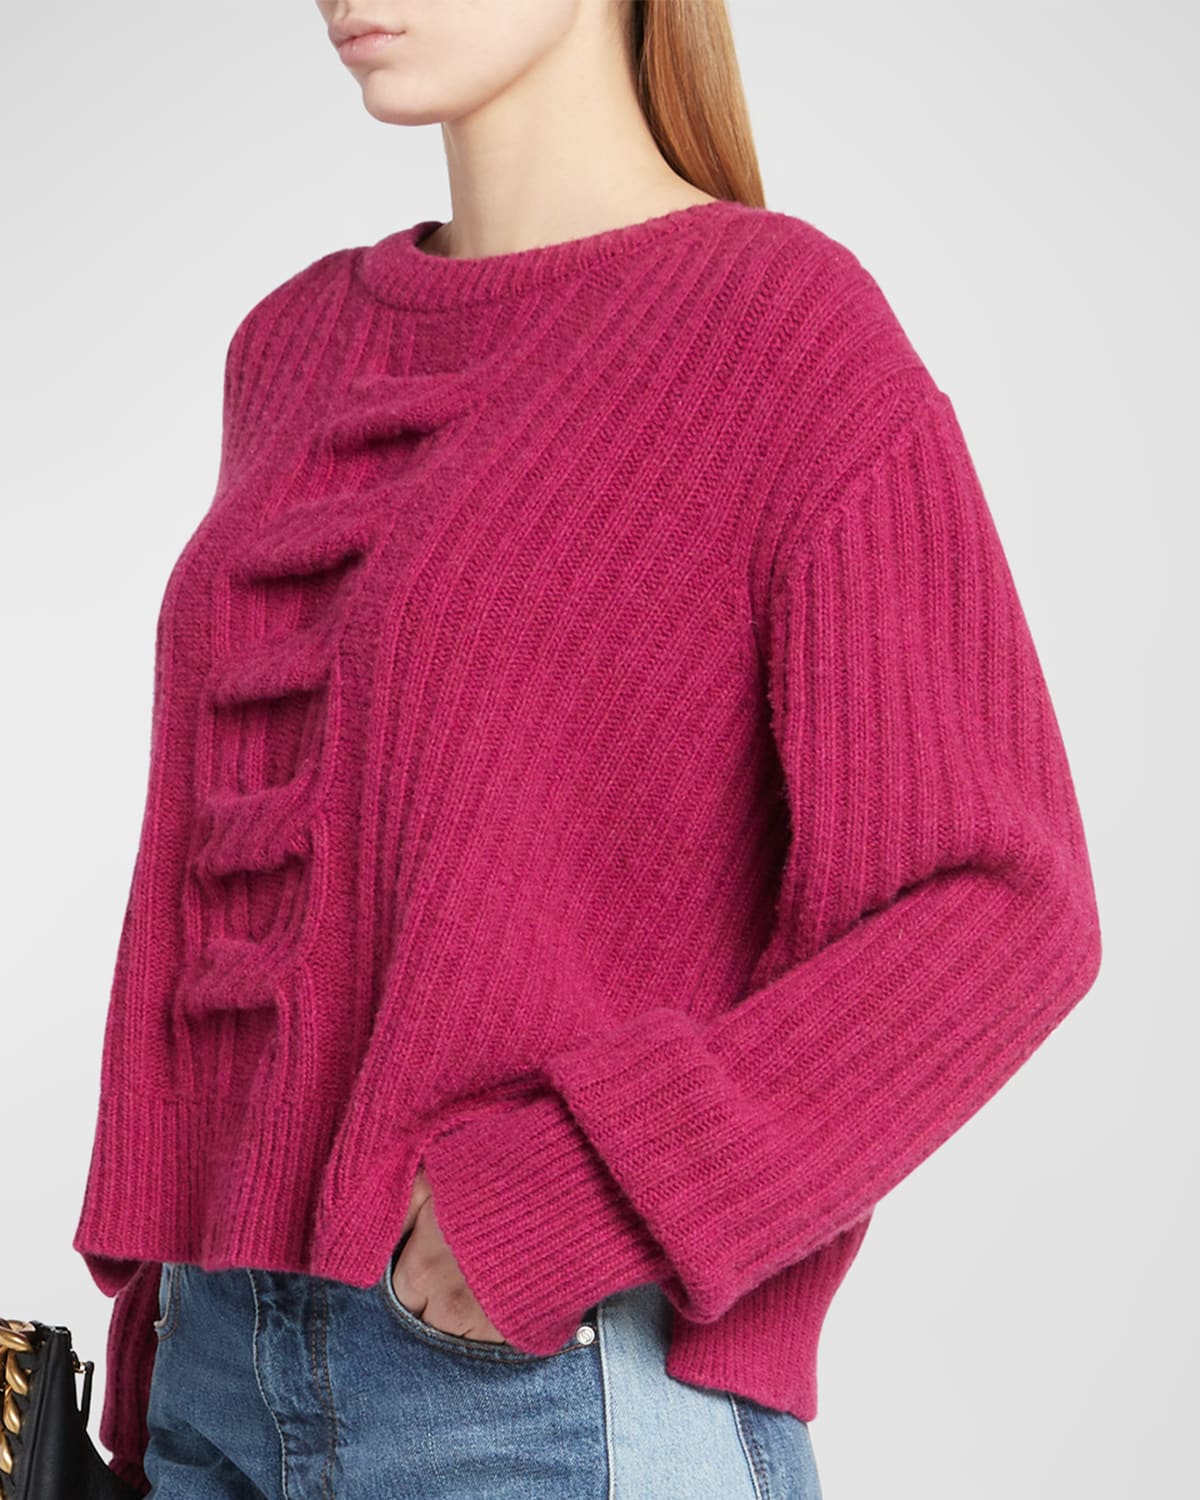 STELLA MCCARTNEY CHAIN CABLE REGENERATED CASHMERE KNIT SWEATER